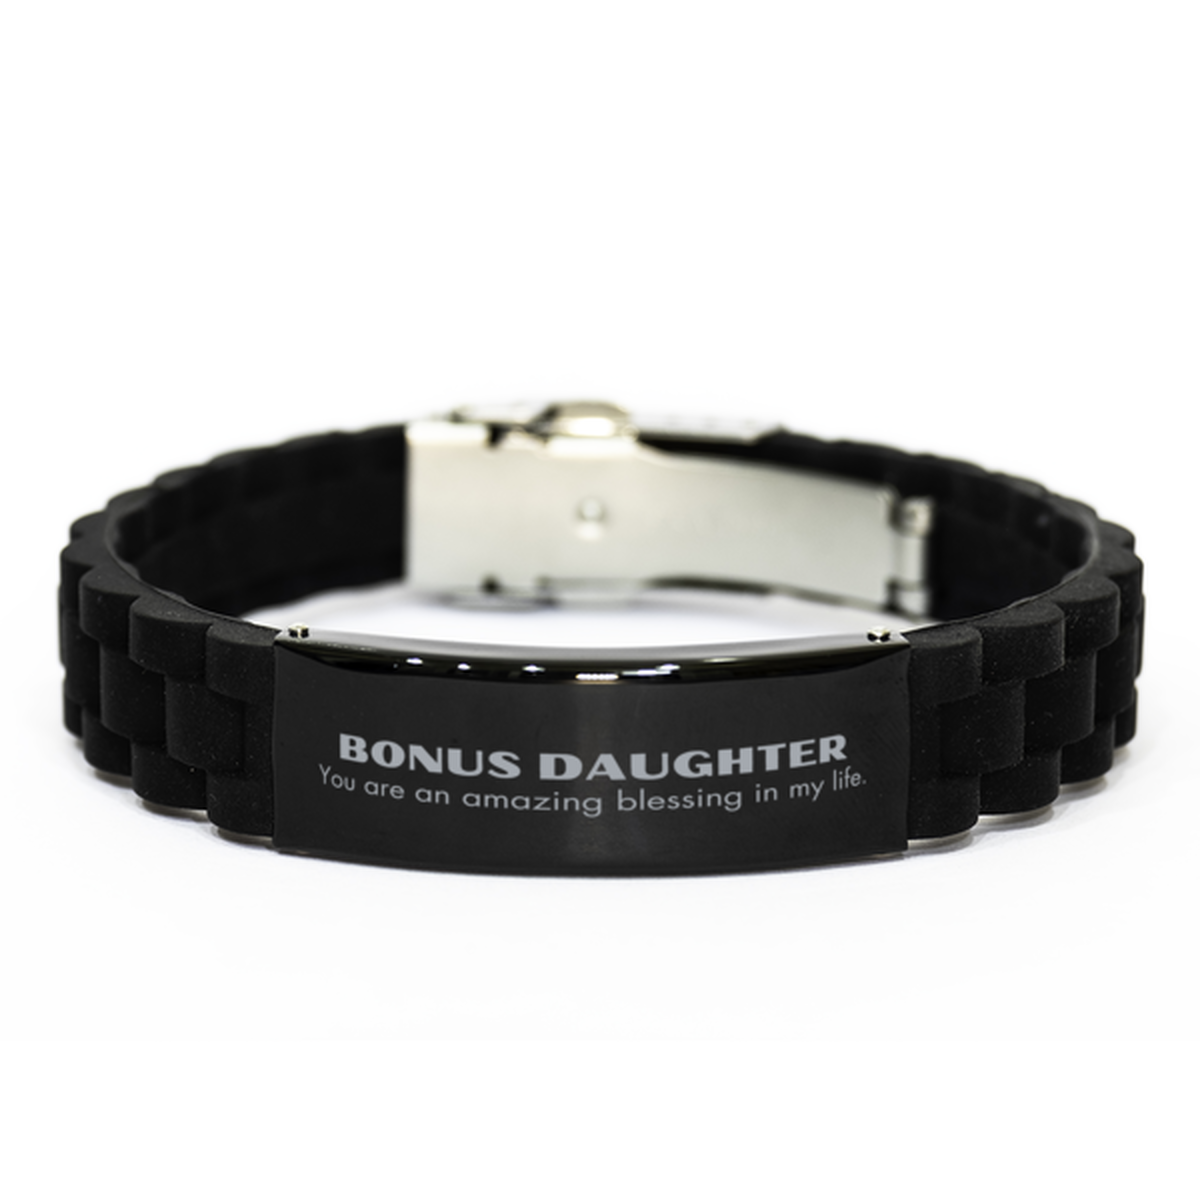 Bonus Daughter Black Glidelock Clasp Bracelet, You are an amazing blessing in my life, Thank You Gifts For Bonus Daughter, Inspirational Birthday Christmas Unique Gifts For Bonus Daughter